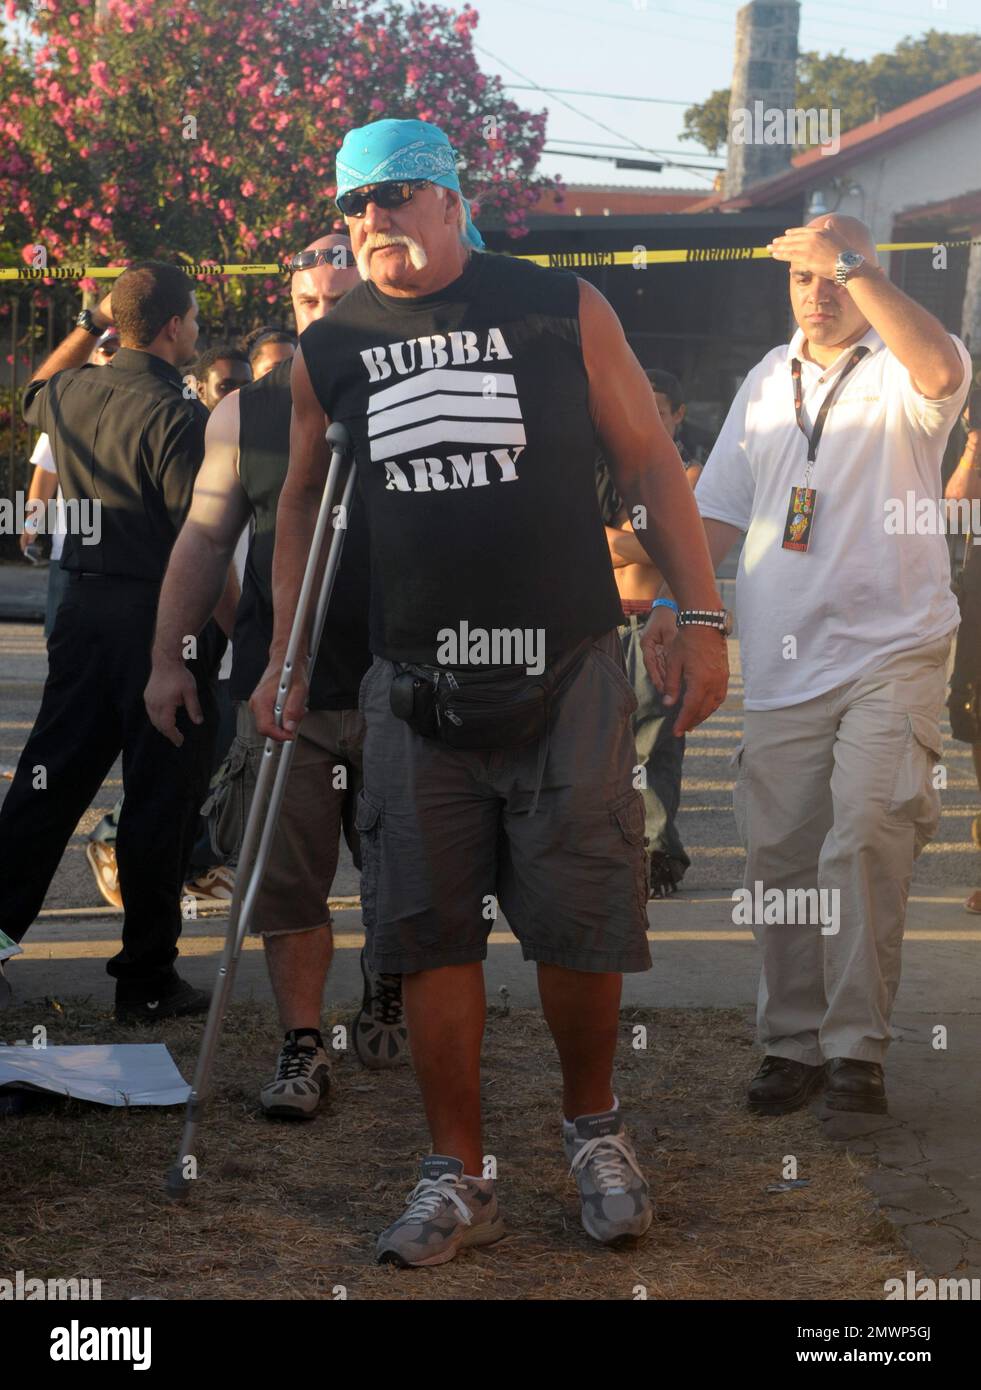 Miami, United States Of America. 15th Mar, 2009. MIAMI - FL - MARCH 15; Hulk Hogan (AKA Terry Gene Bollea) backstage after Brooke Hogans performace at the Calle Ocho carnival. The Hulk was seen with on crutches after he was injured at the court house fighting with his x wifes lawyer. the hulk also had only one crutch after the other was was stolen from him at the airport. On March 15, 2009 in Miami Florida People: Brooke Hogan, Hulk Hogan Transmission Ref: FLXX Must call if interested Michael Storms Credit: Storms Media Group/Alamy Live News Stock Photo